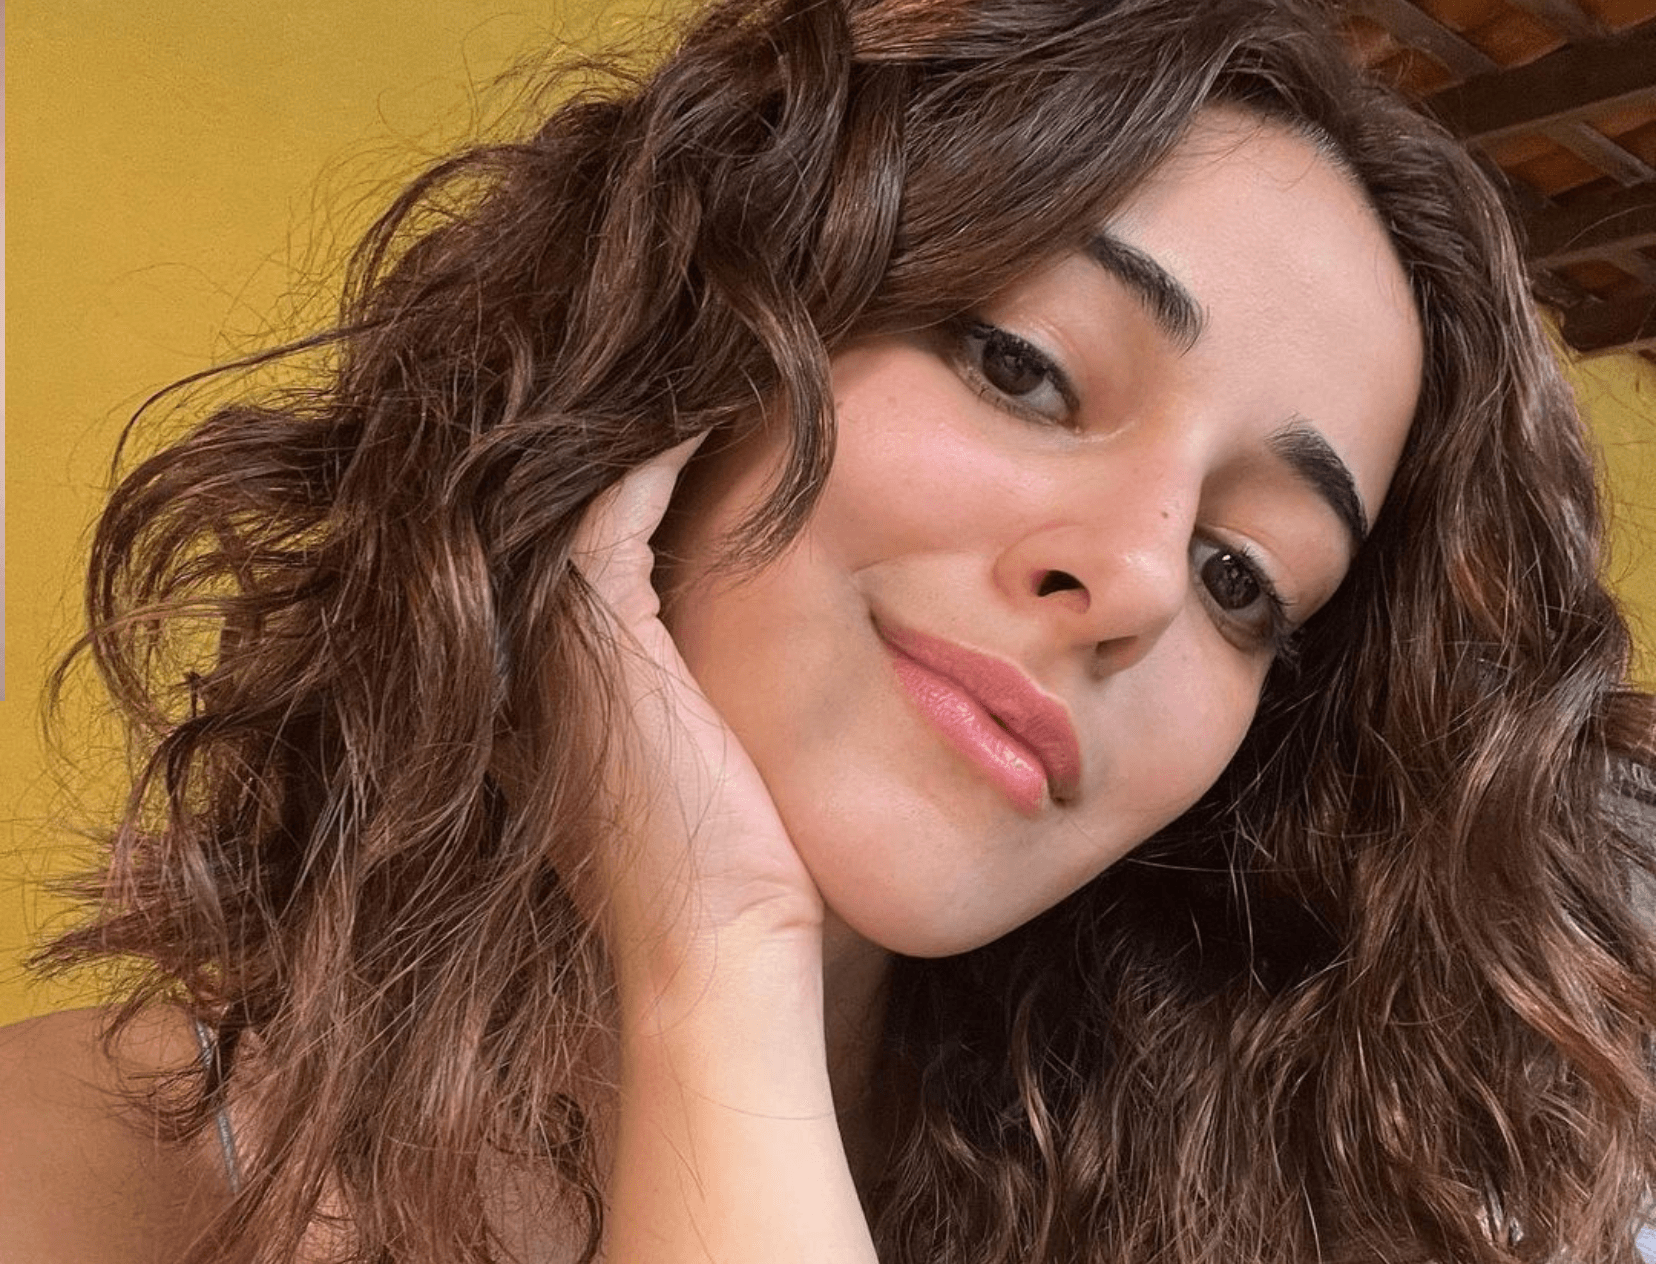 2 Ingredients That Ananya Panday Uses For Glowing Skin